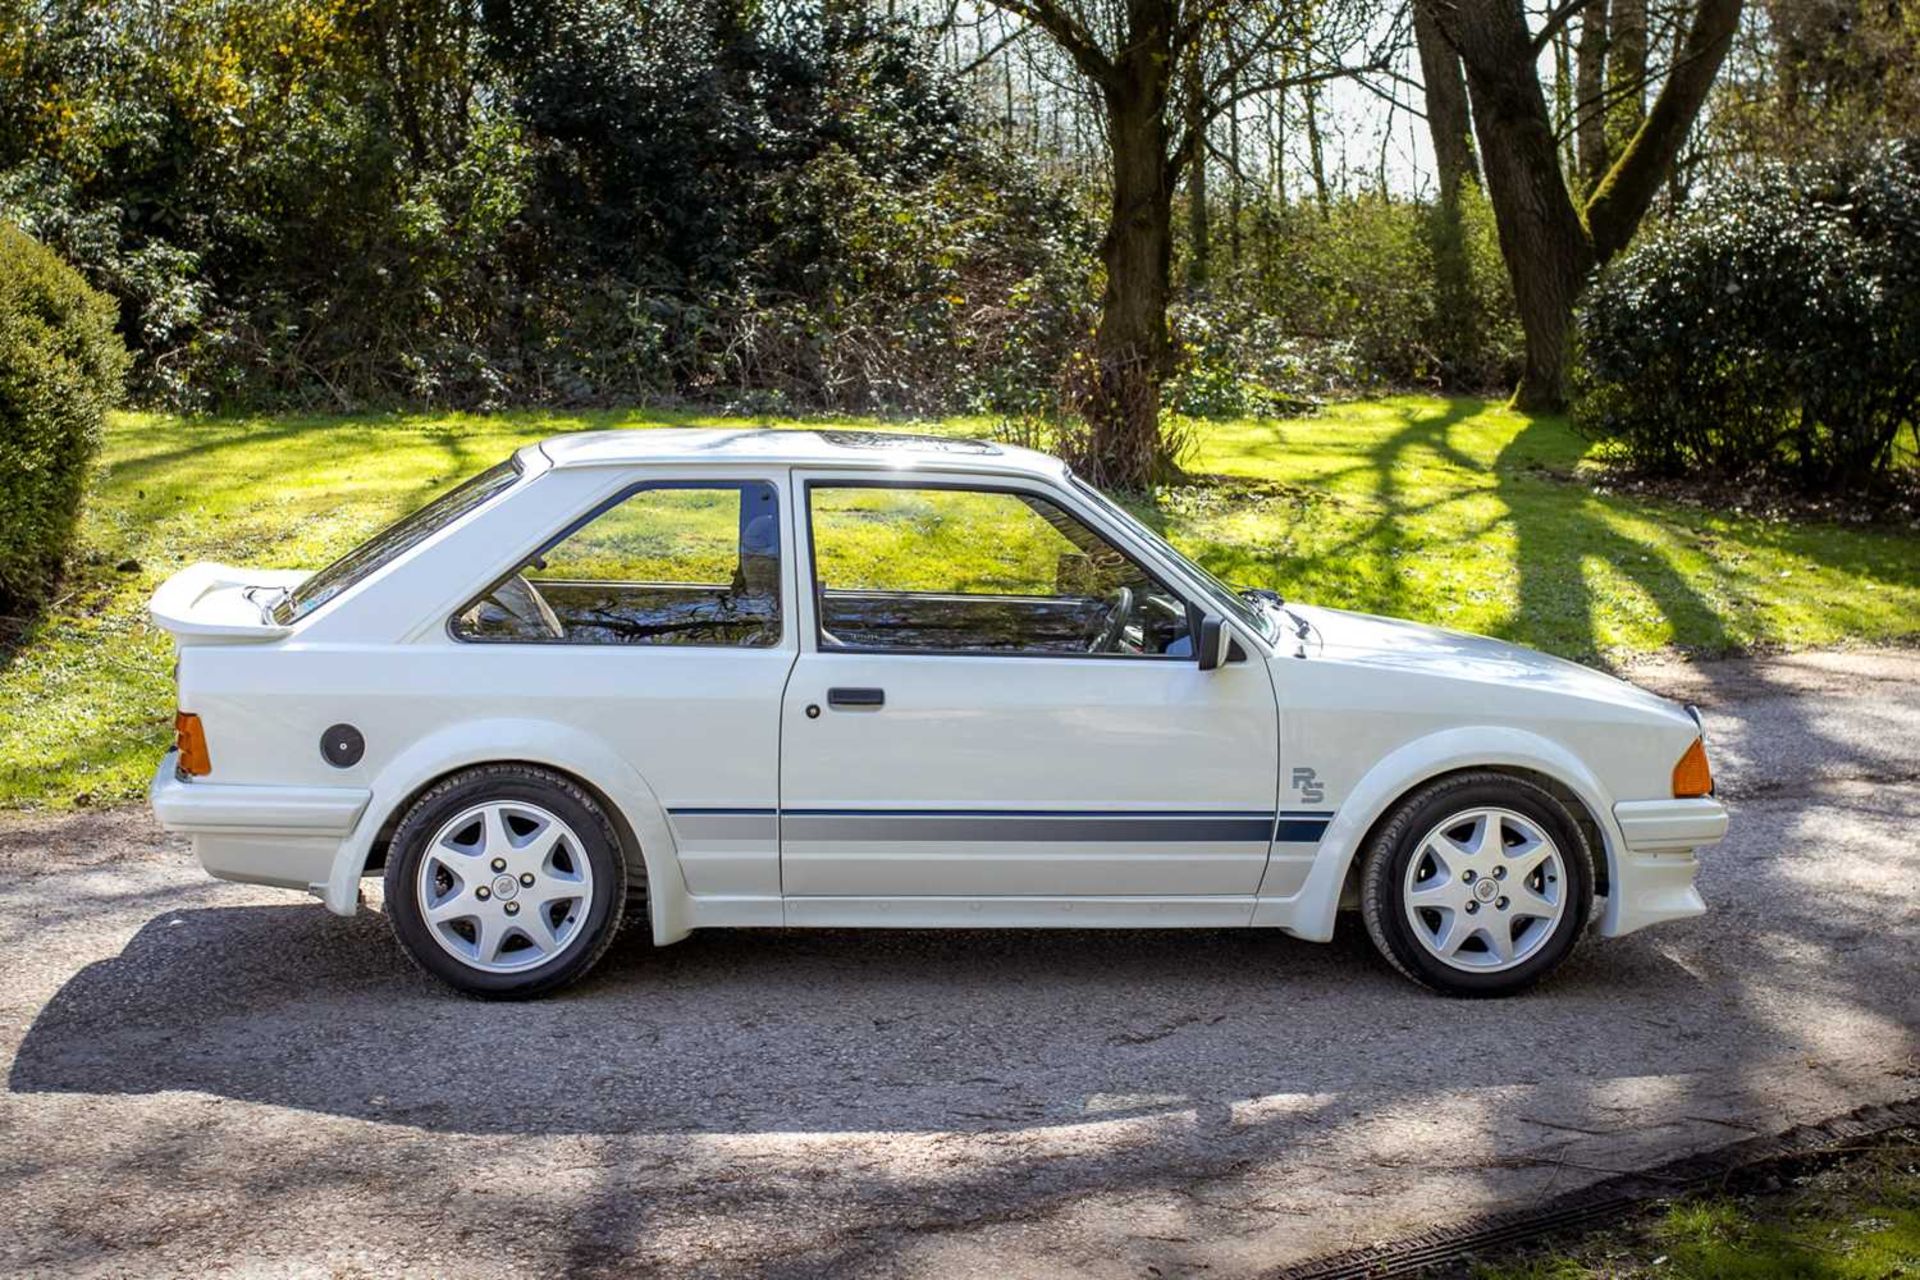 1985 Ford Escort RS Turbo S1 Subject to a full restoration  - Image 35 of 76